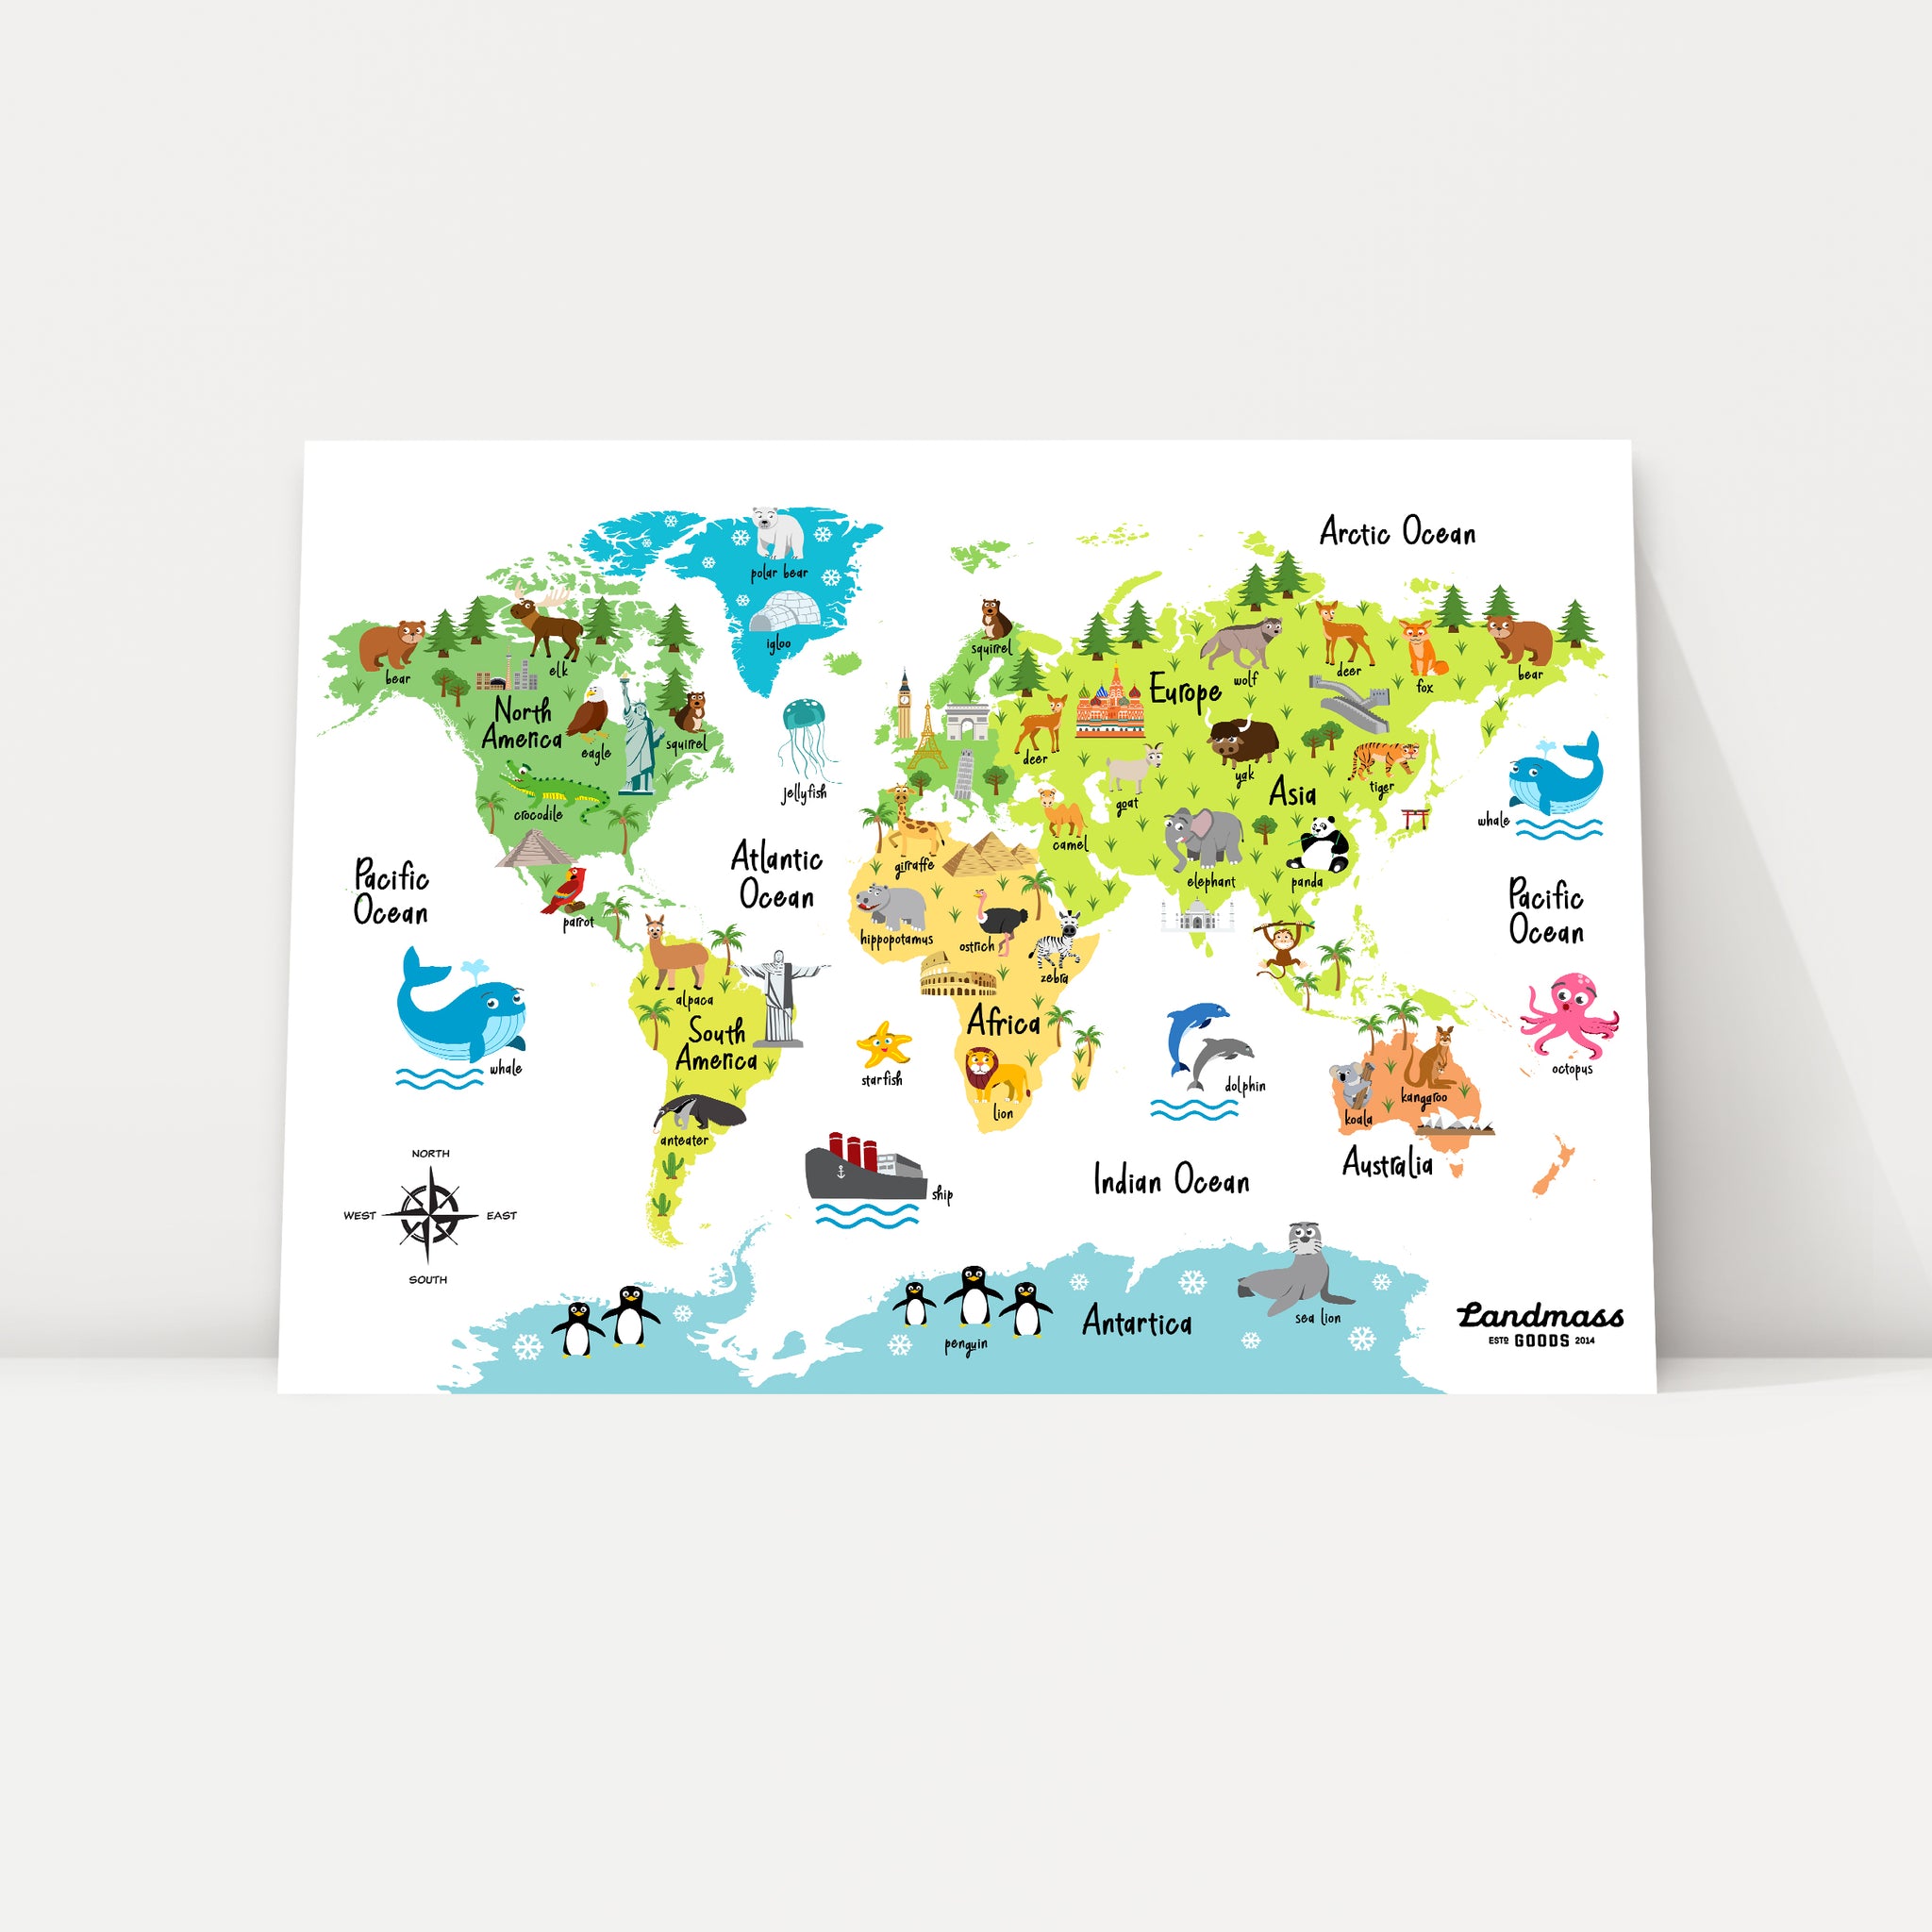 Colorful Children's Animal World Map Poster - 12x16 inches